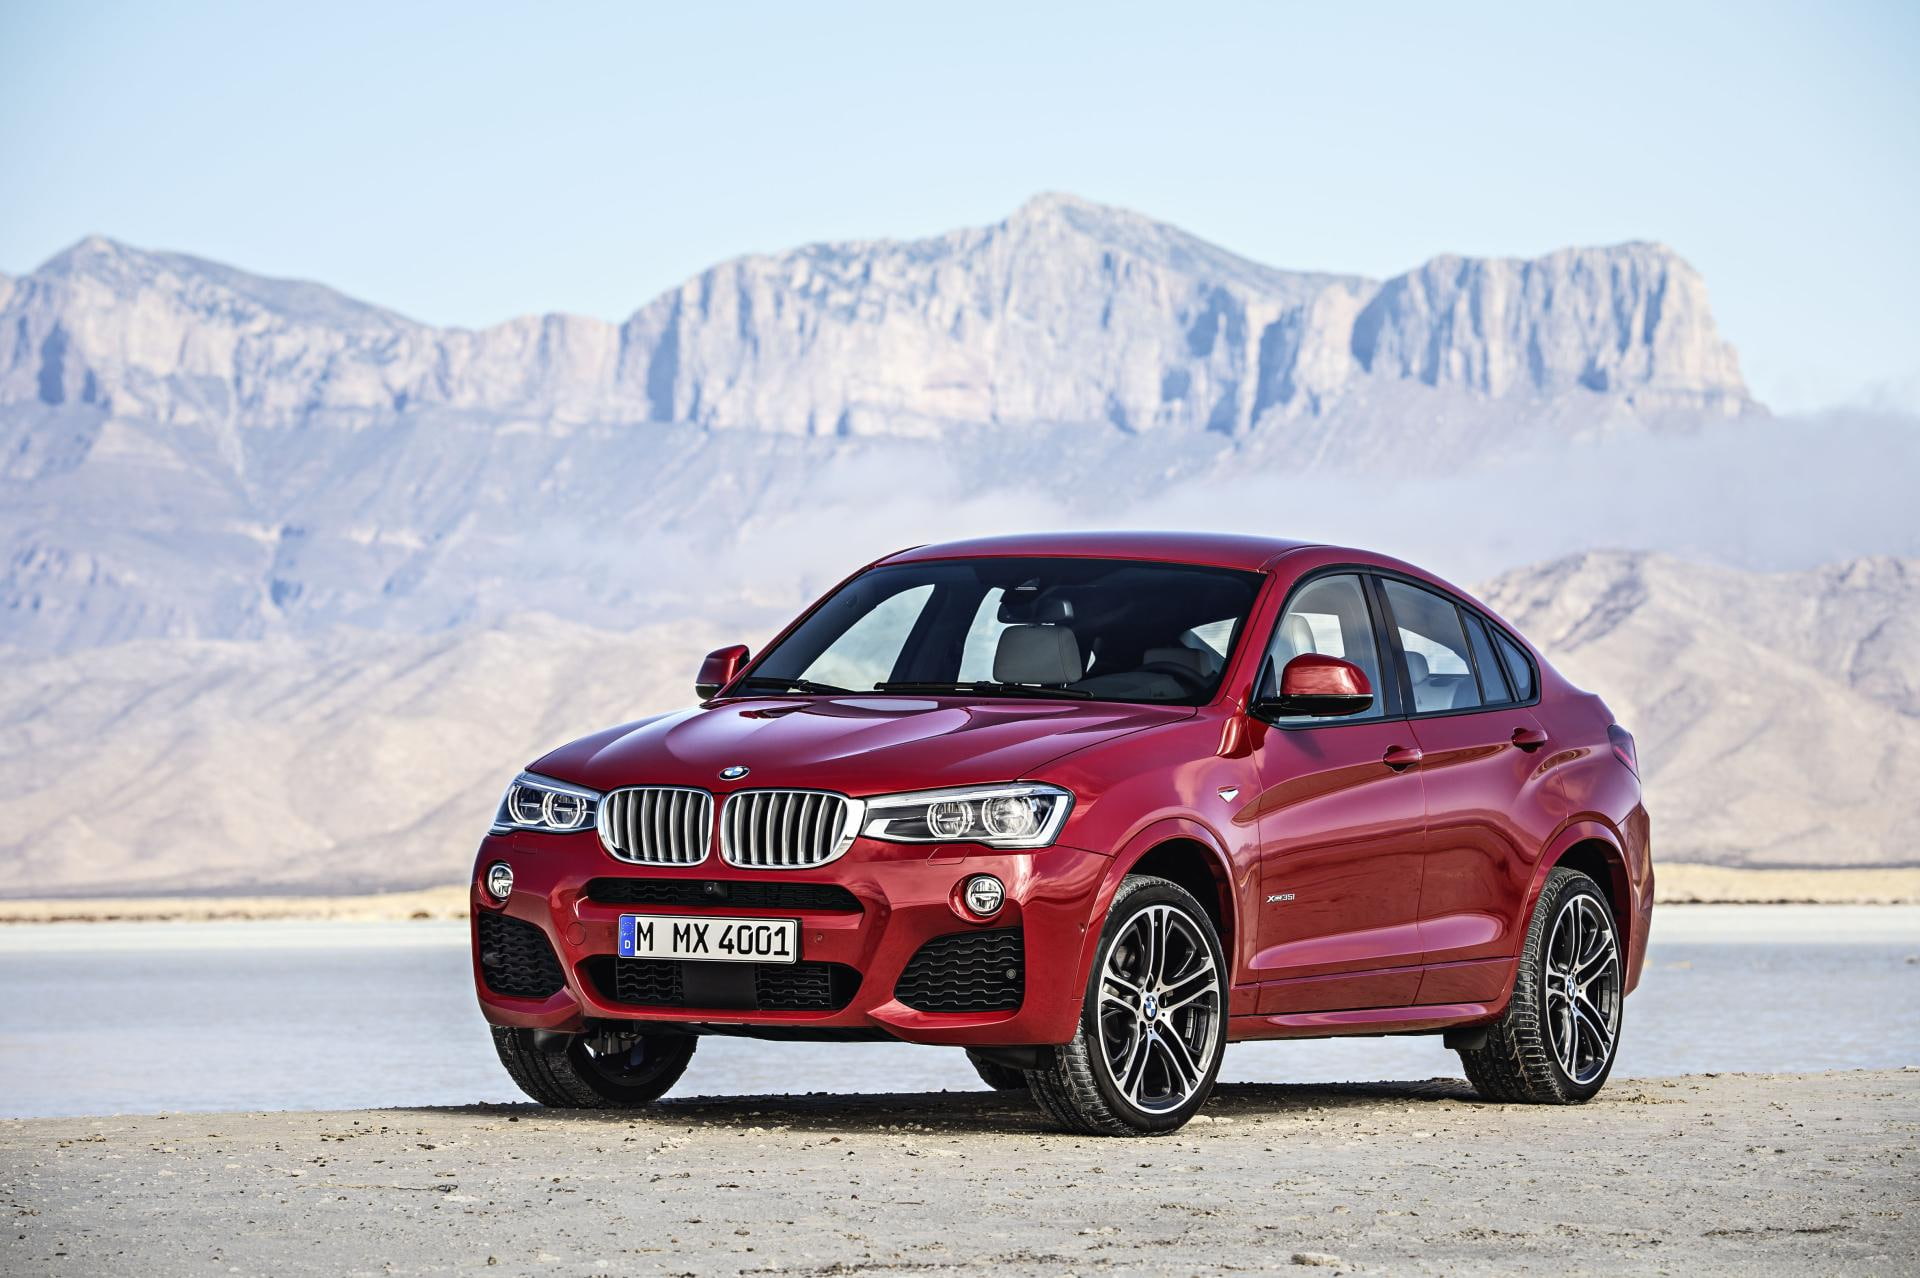 bmw x4 sports activity coupe 14, car, mode of transportation